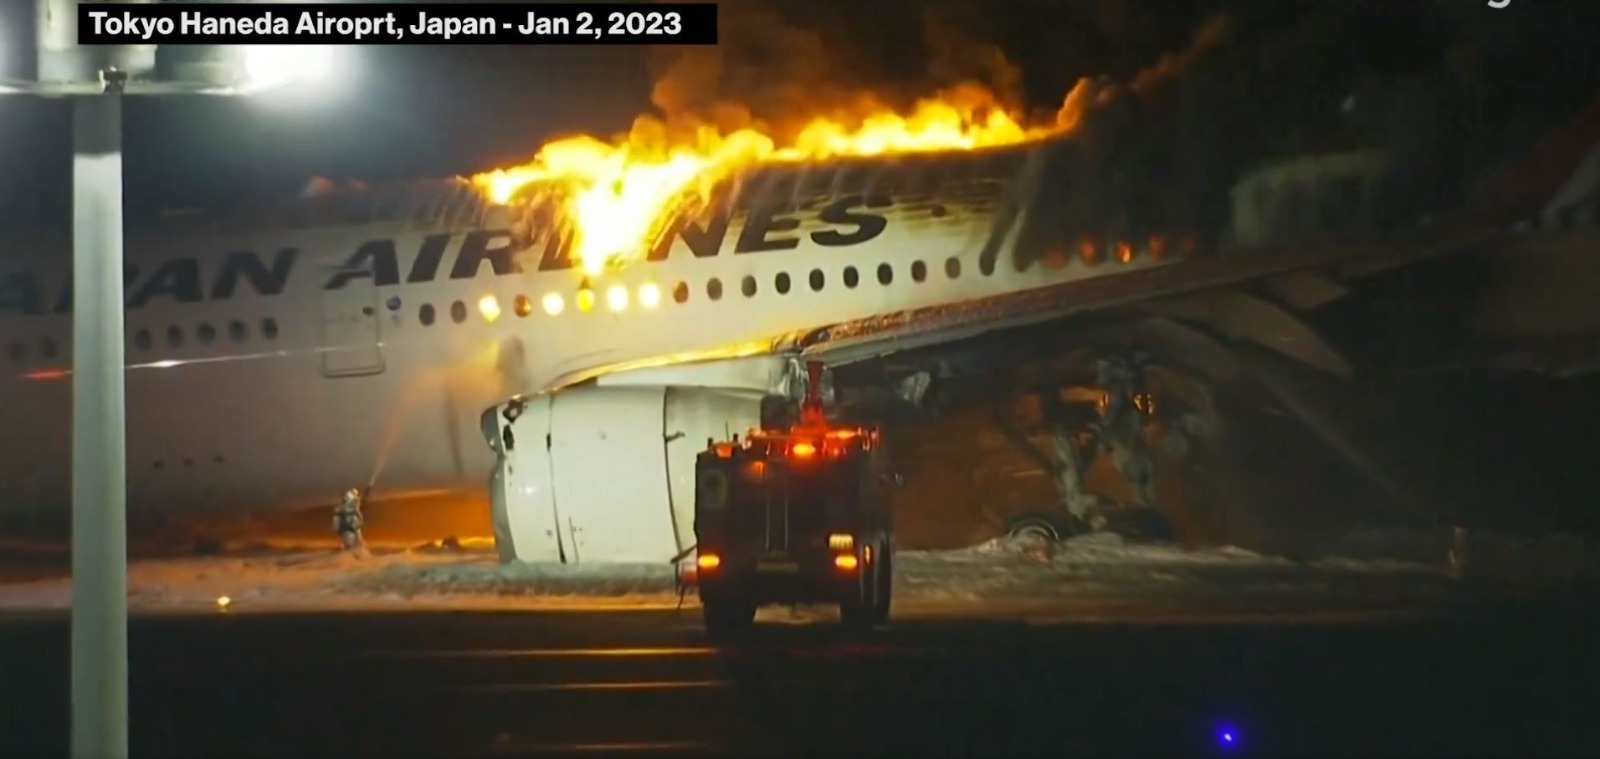 [UPDATED] All 367 passengers evacuated from blazing Japan Airlines plane: NHK